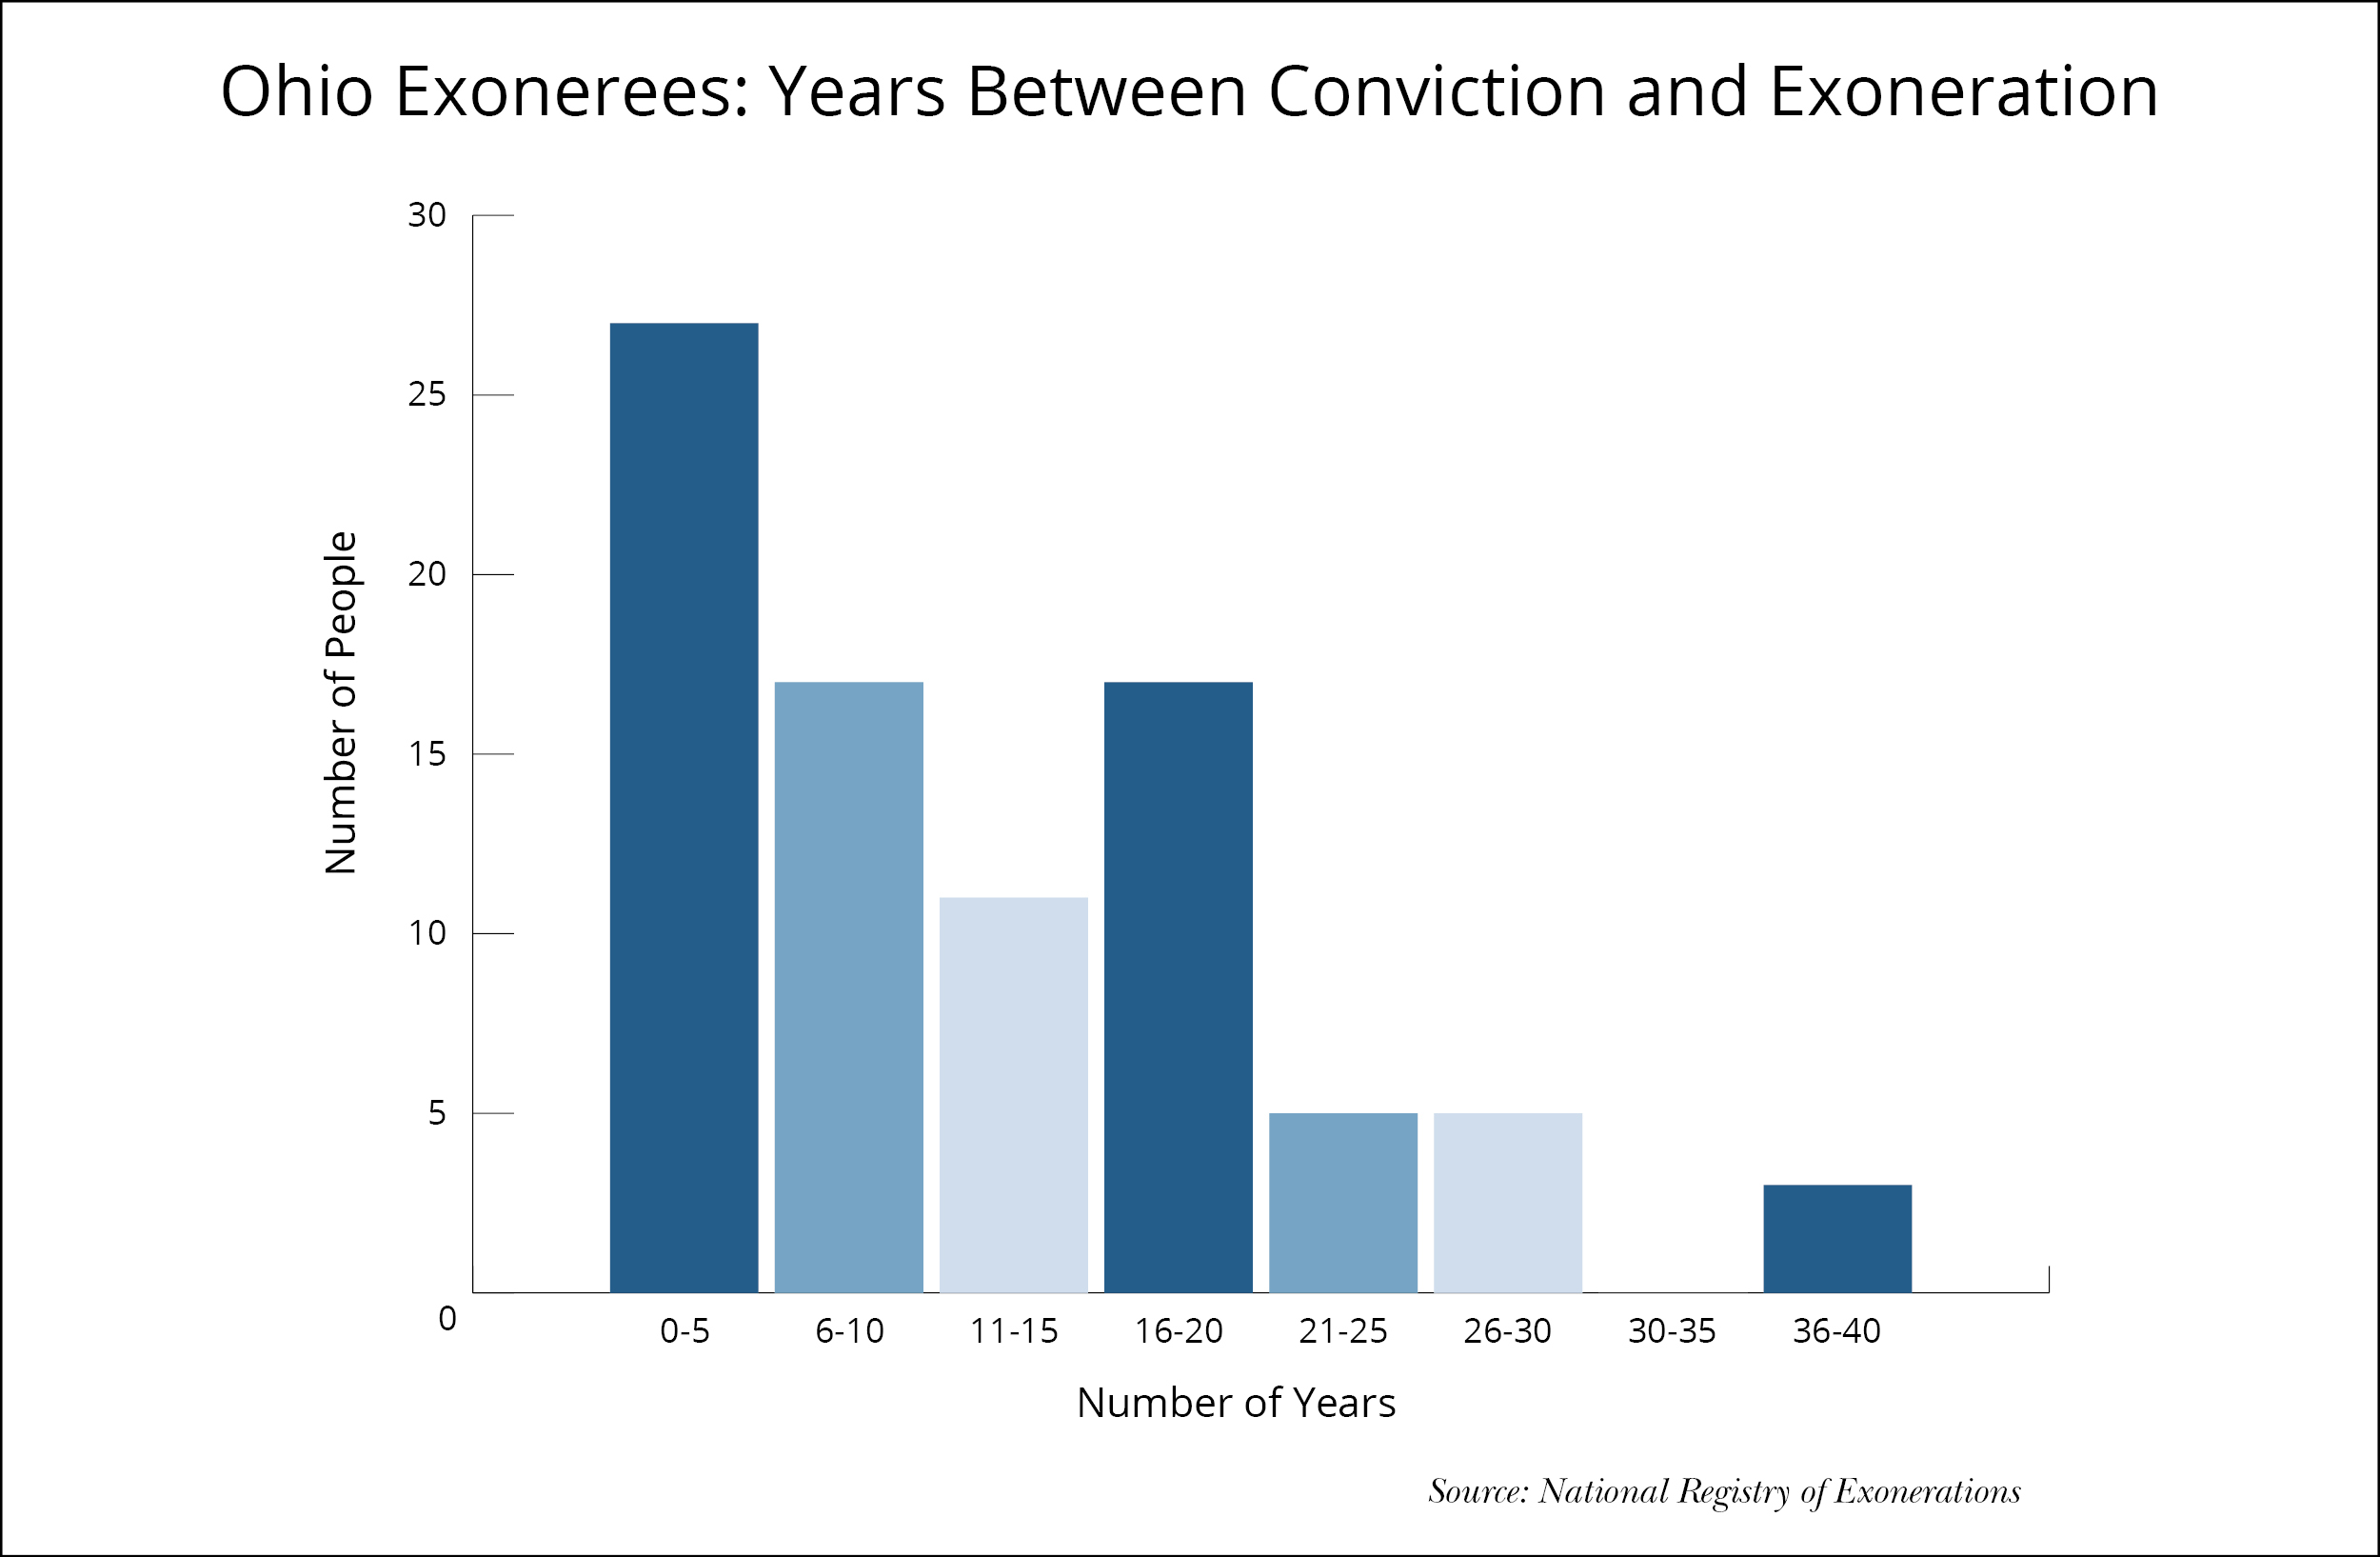 Image of a bar graph showing Ohio exonerees years between conviction and exoneration